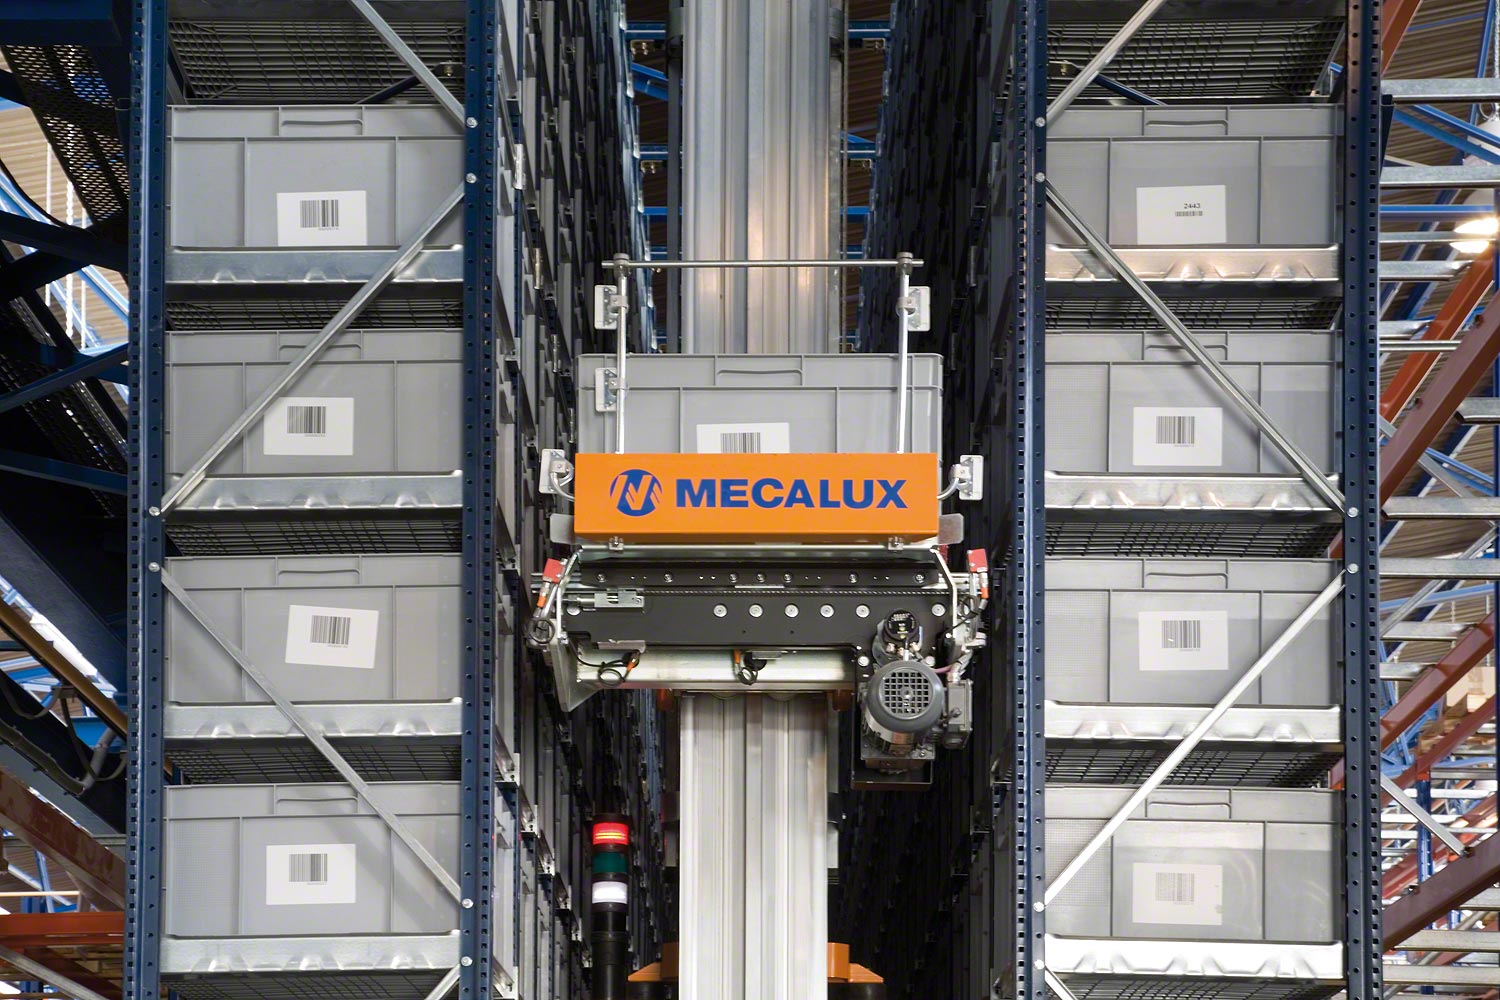 Stacker cranes for boxes